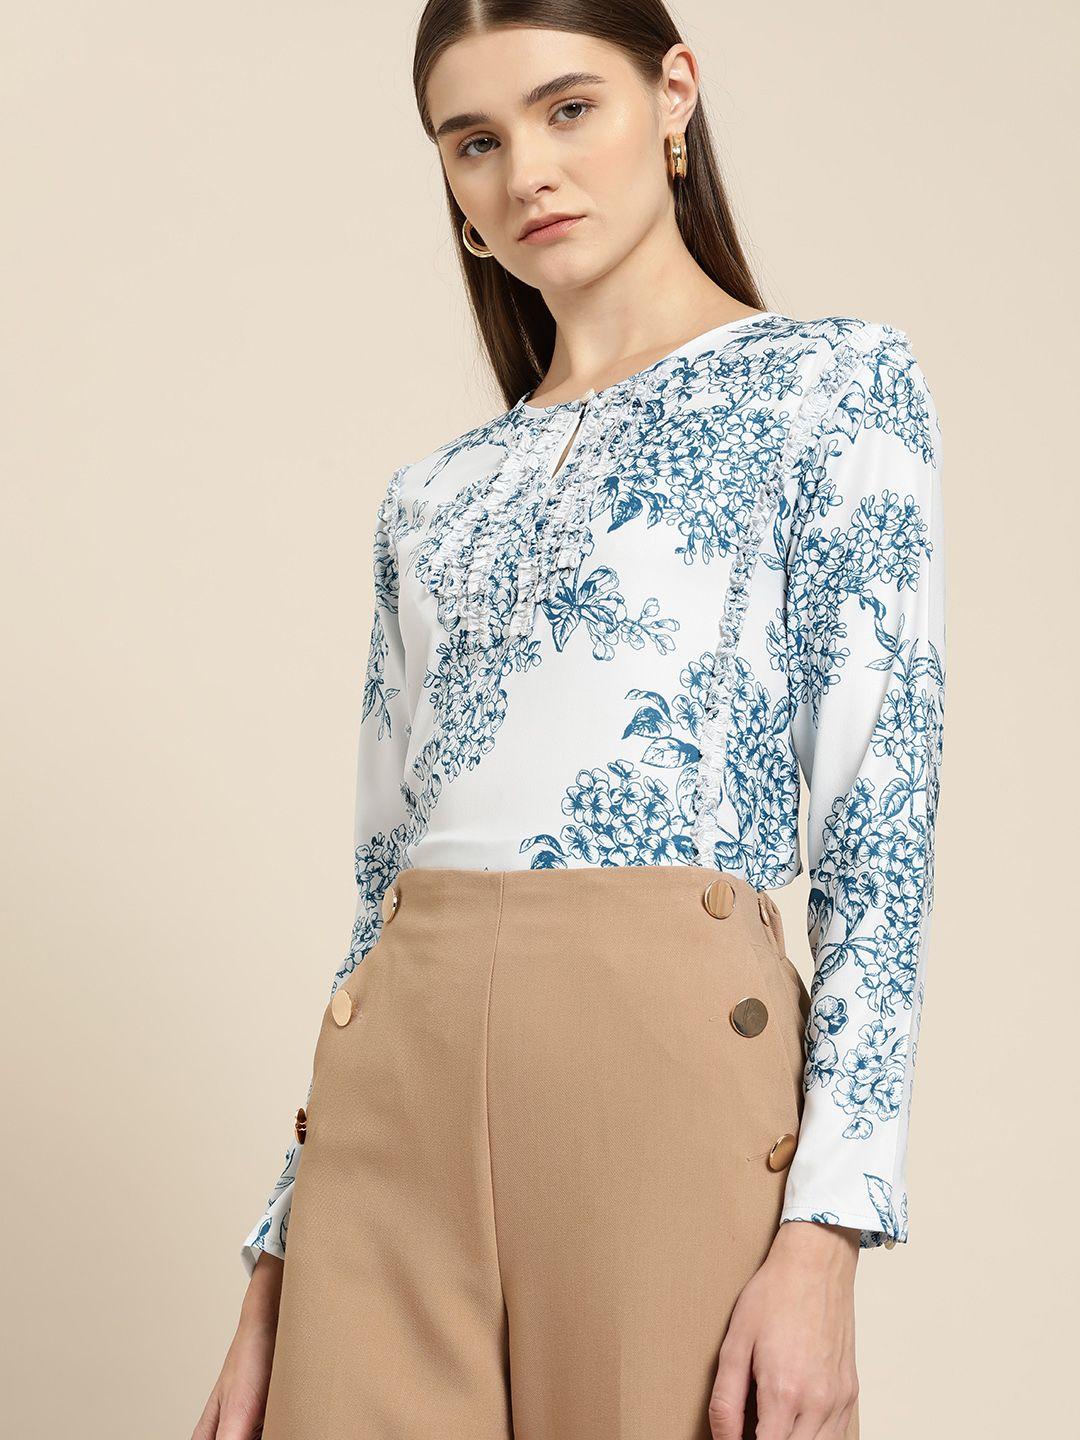 her by invictus floral print ruffles top